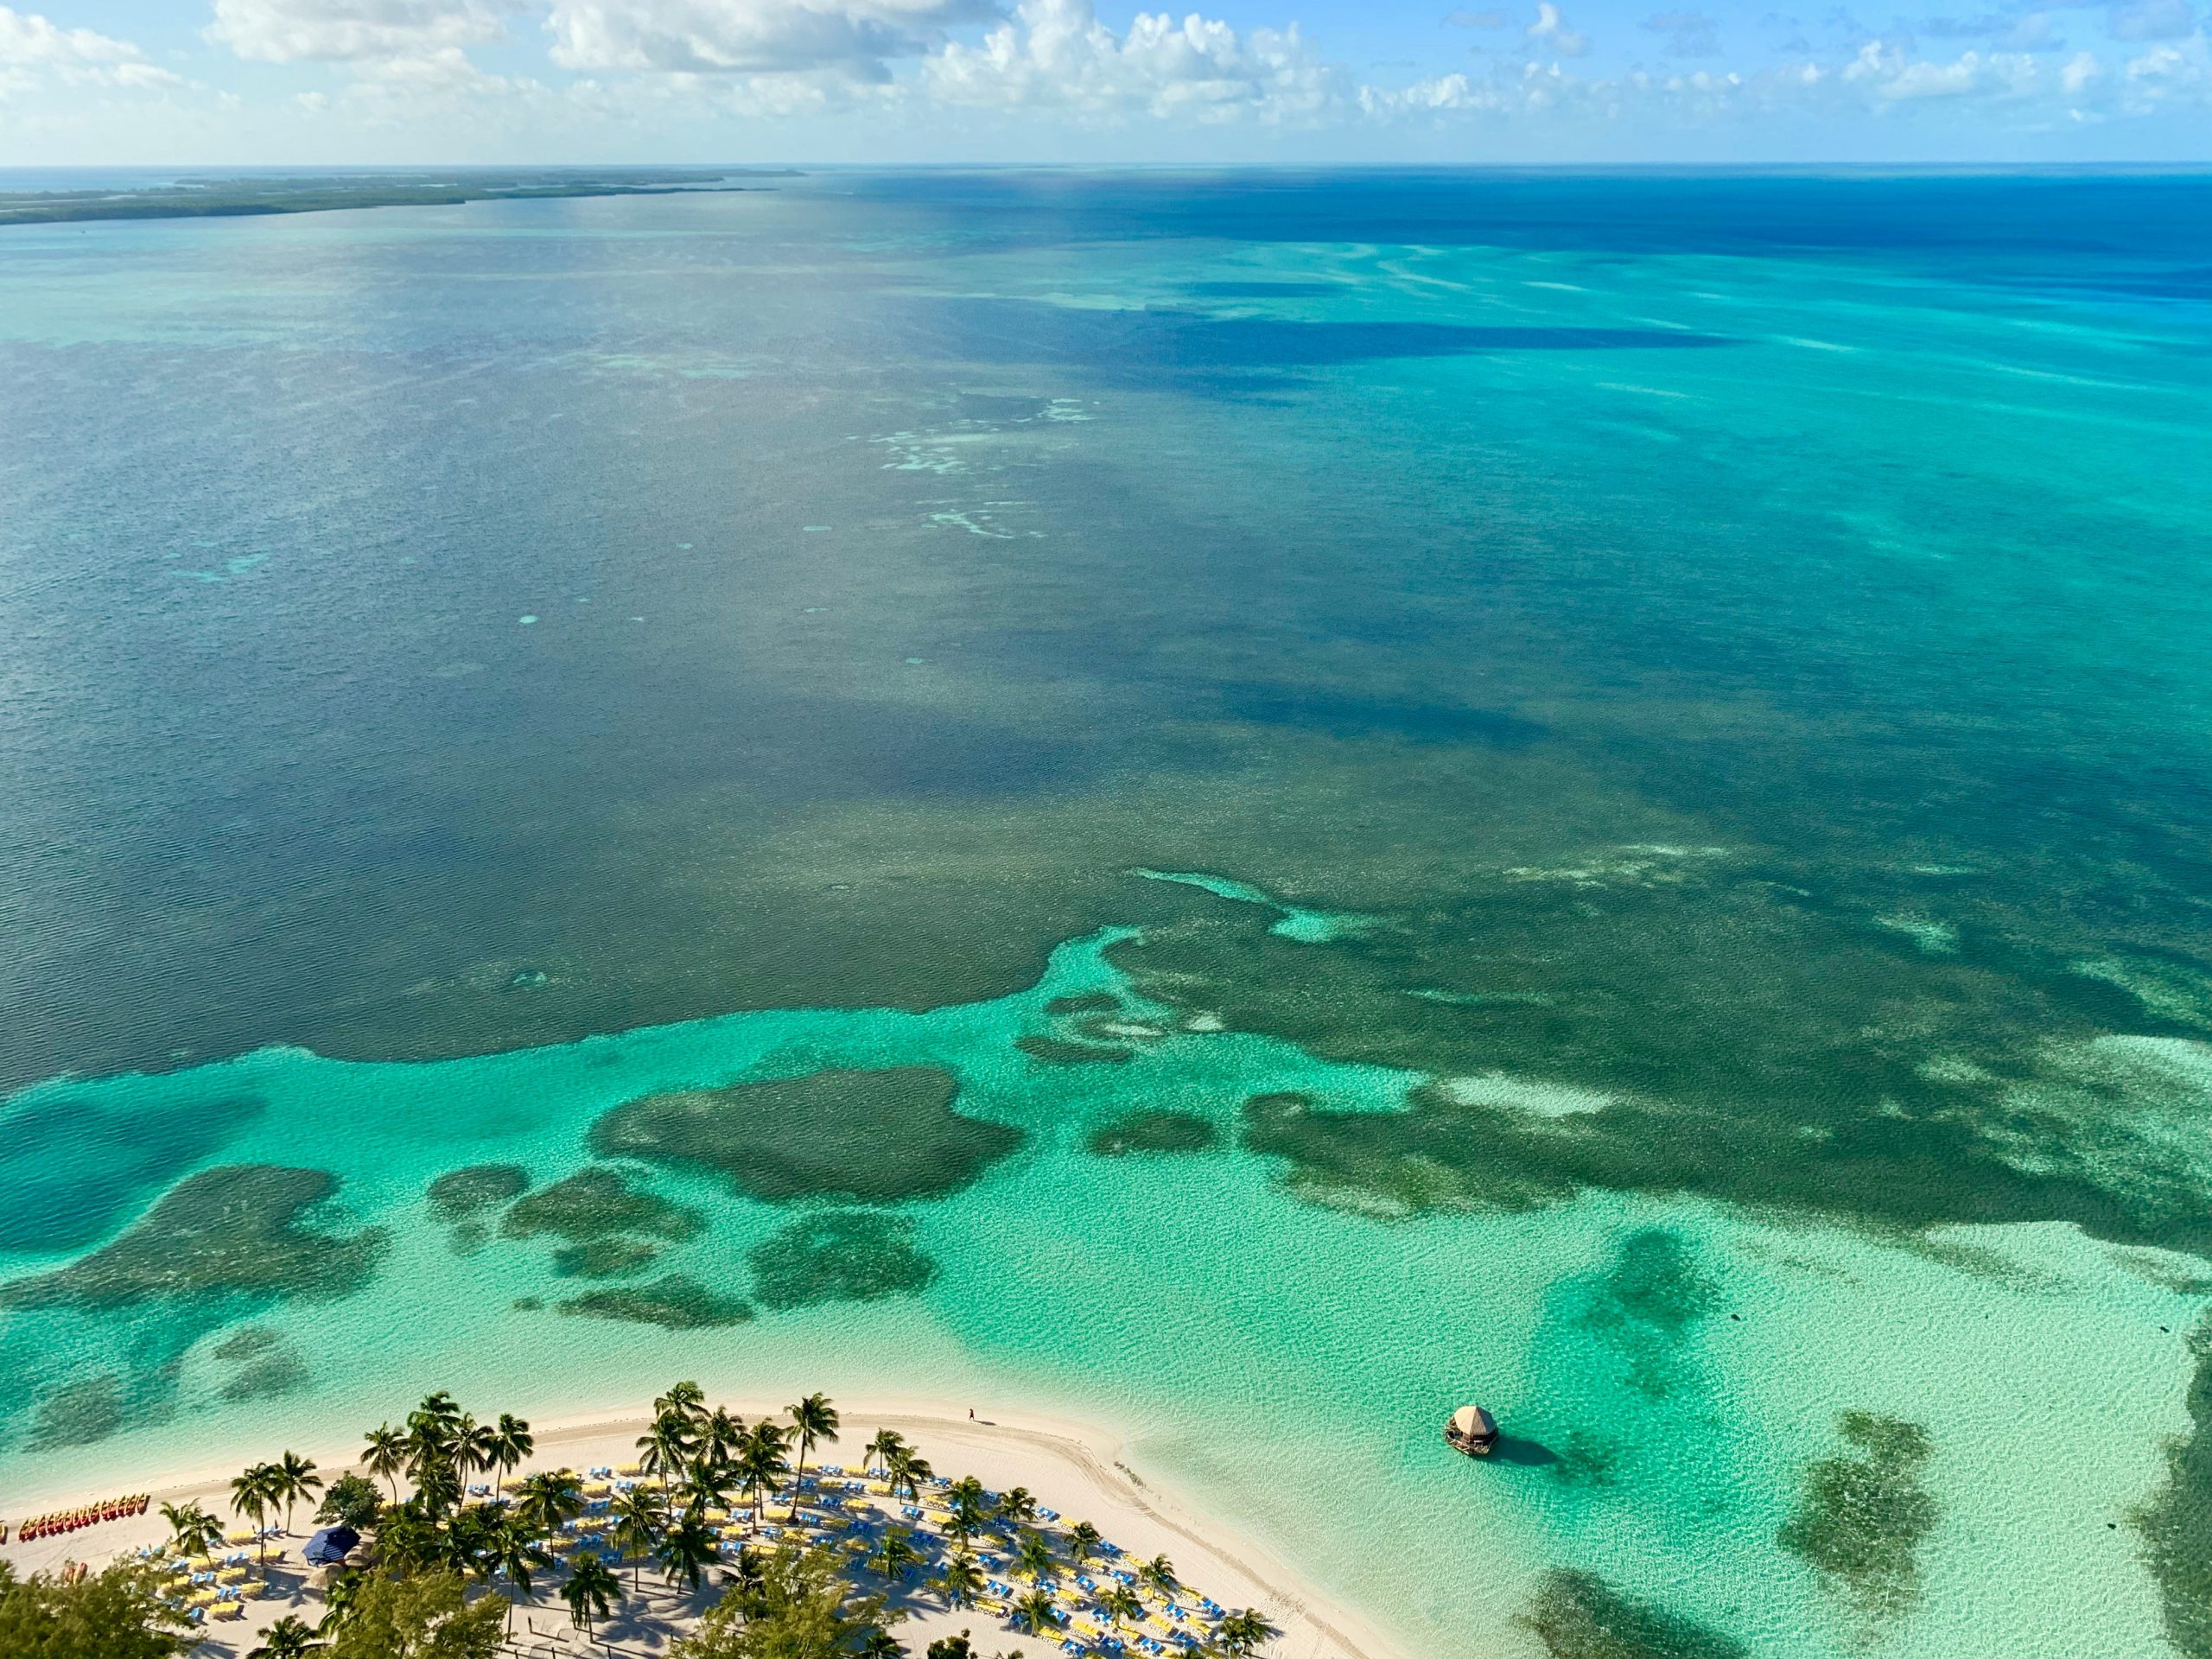 discover the beauty and tranquility of the caribbean sea. explore crystal-clear waters, pristine beaches, and vibrant marine life in this tropical paradise.